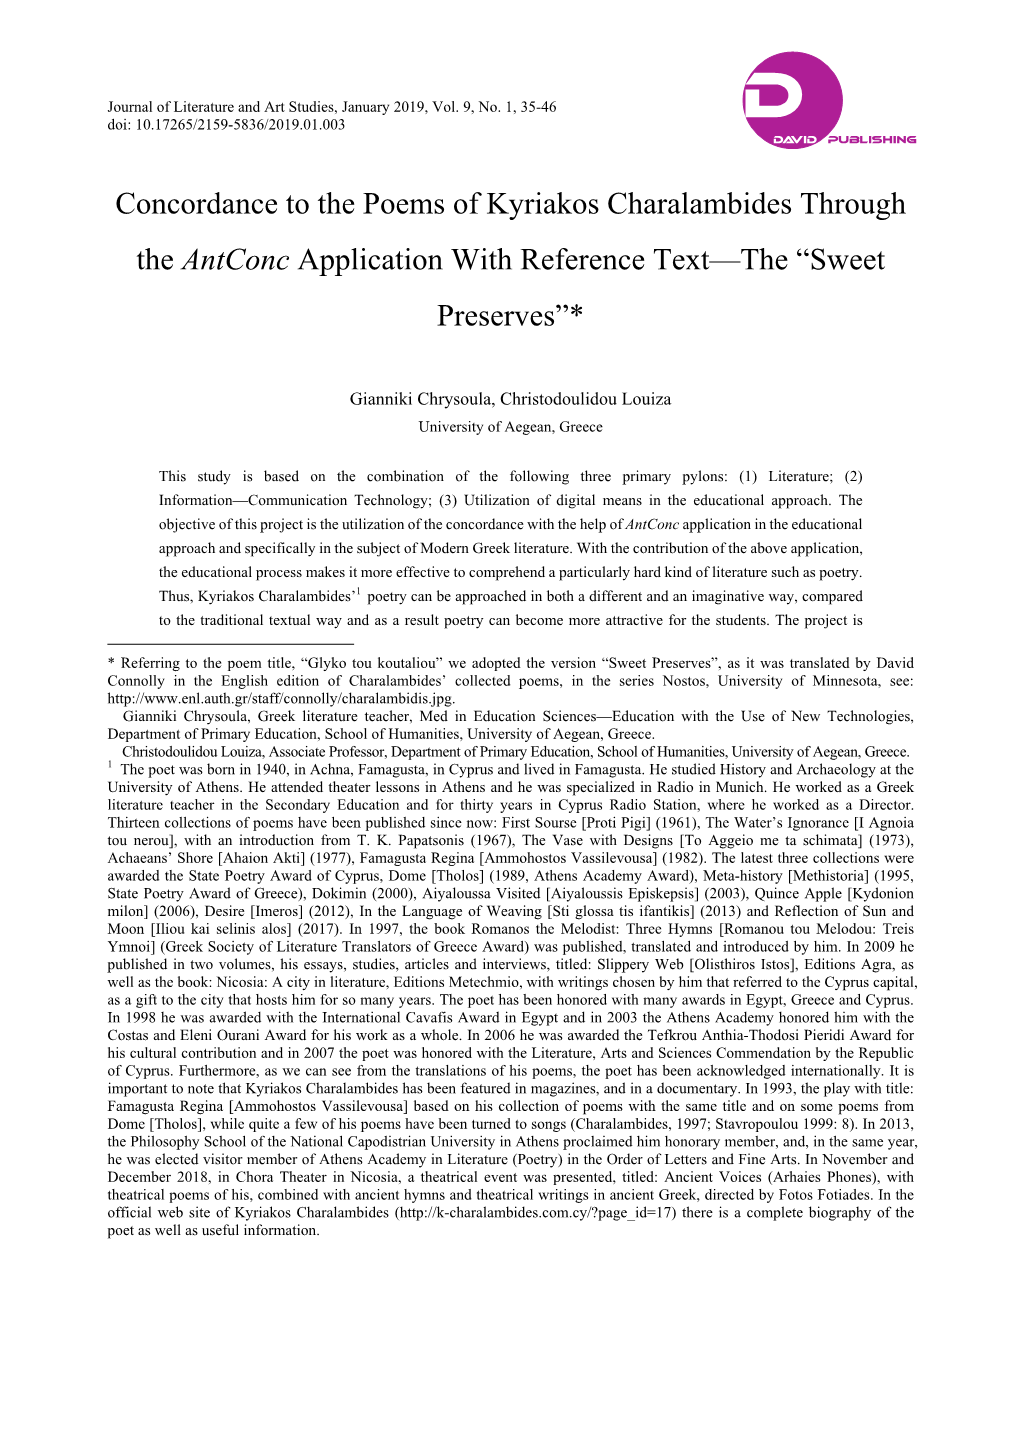 Concordance to the Poems of Kyriakos Charalambides Through the Αntconc Application with Reference Text—The “Sweet Preserves”*